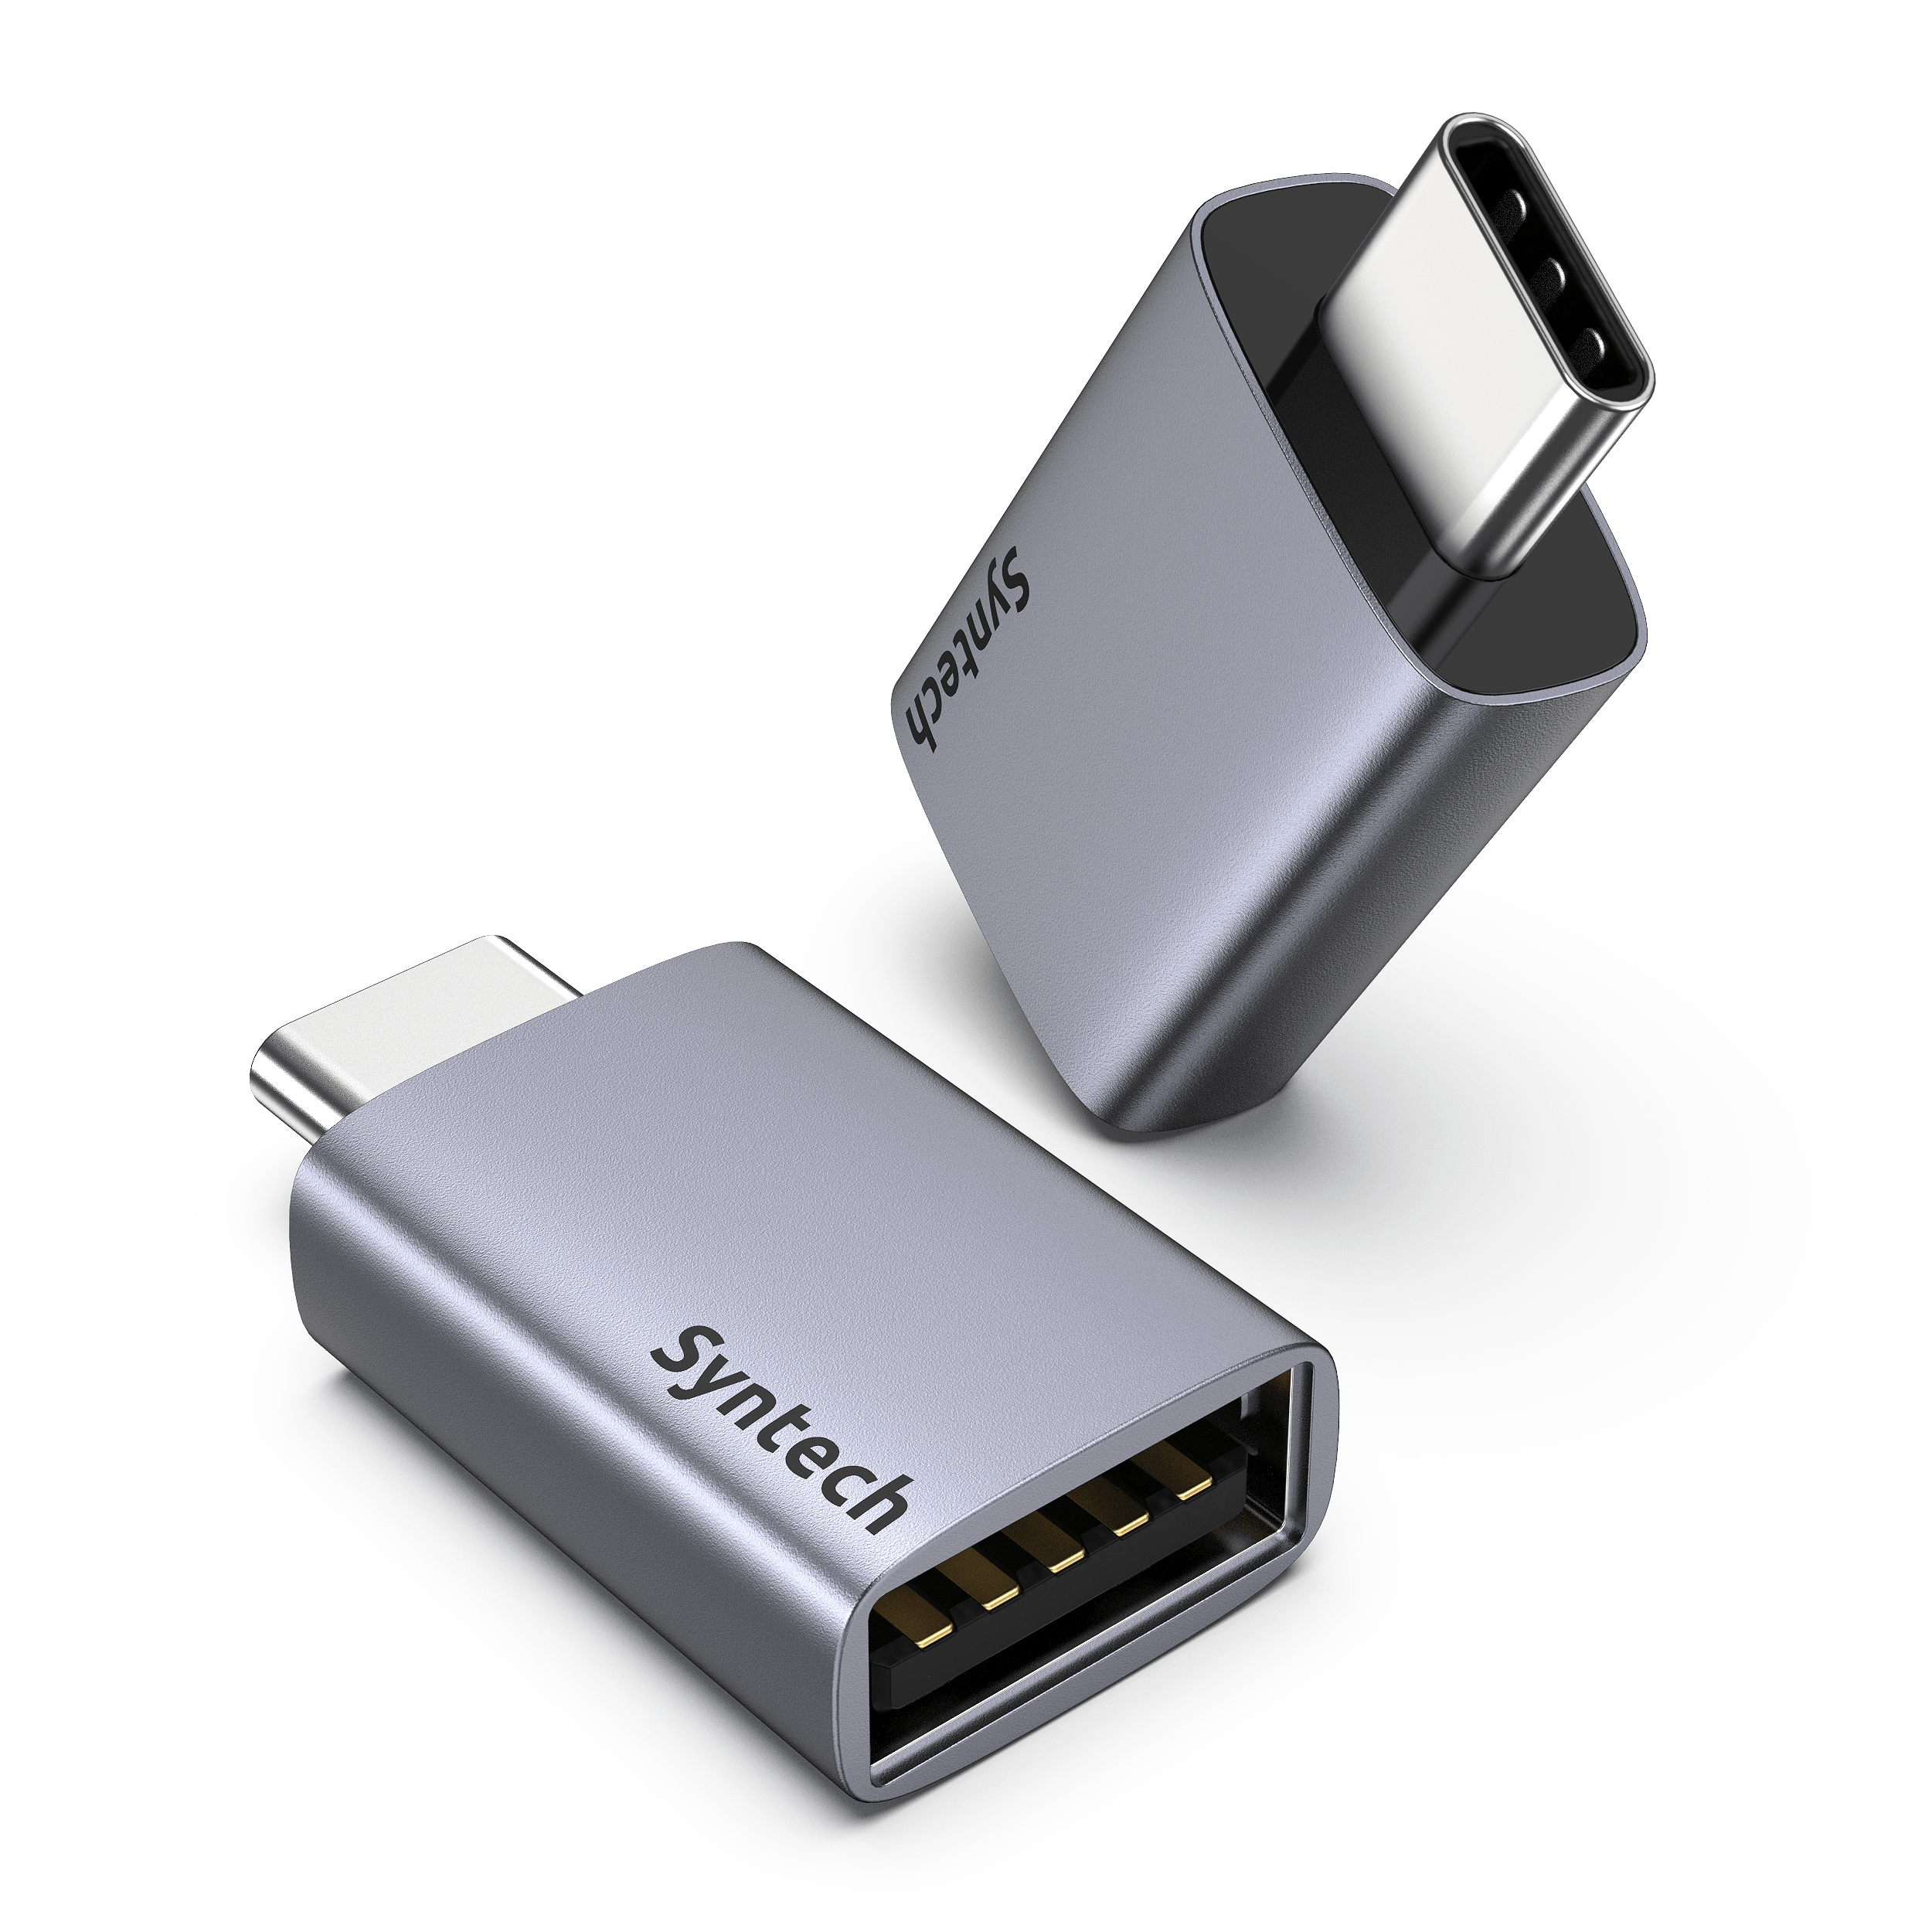  Syntech USB C to USB Adapter Pack of 2 USB C Male to